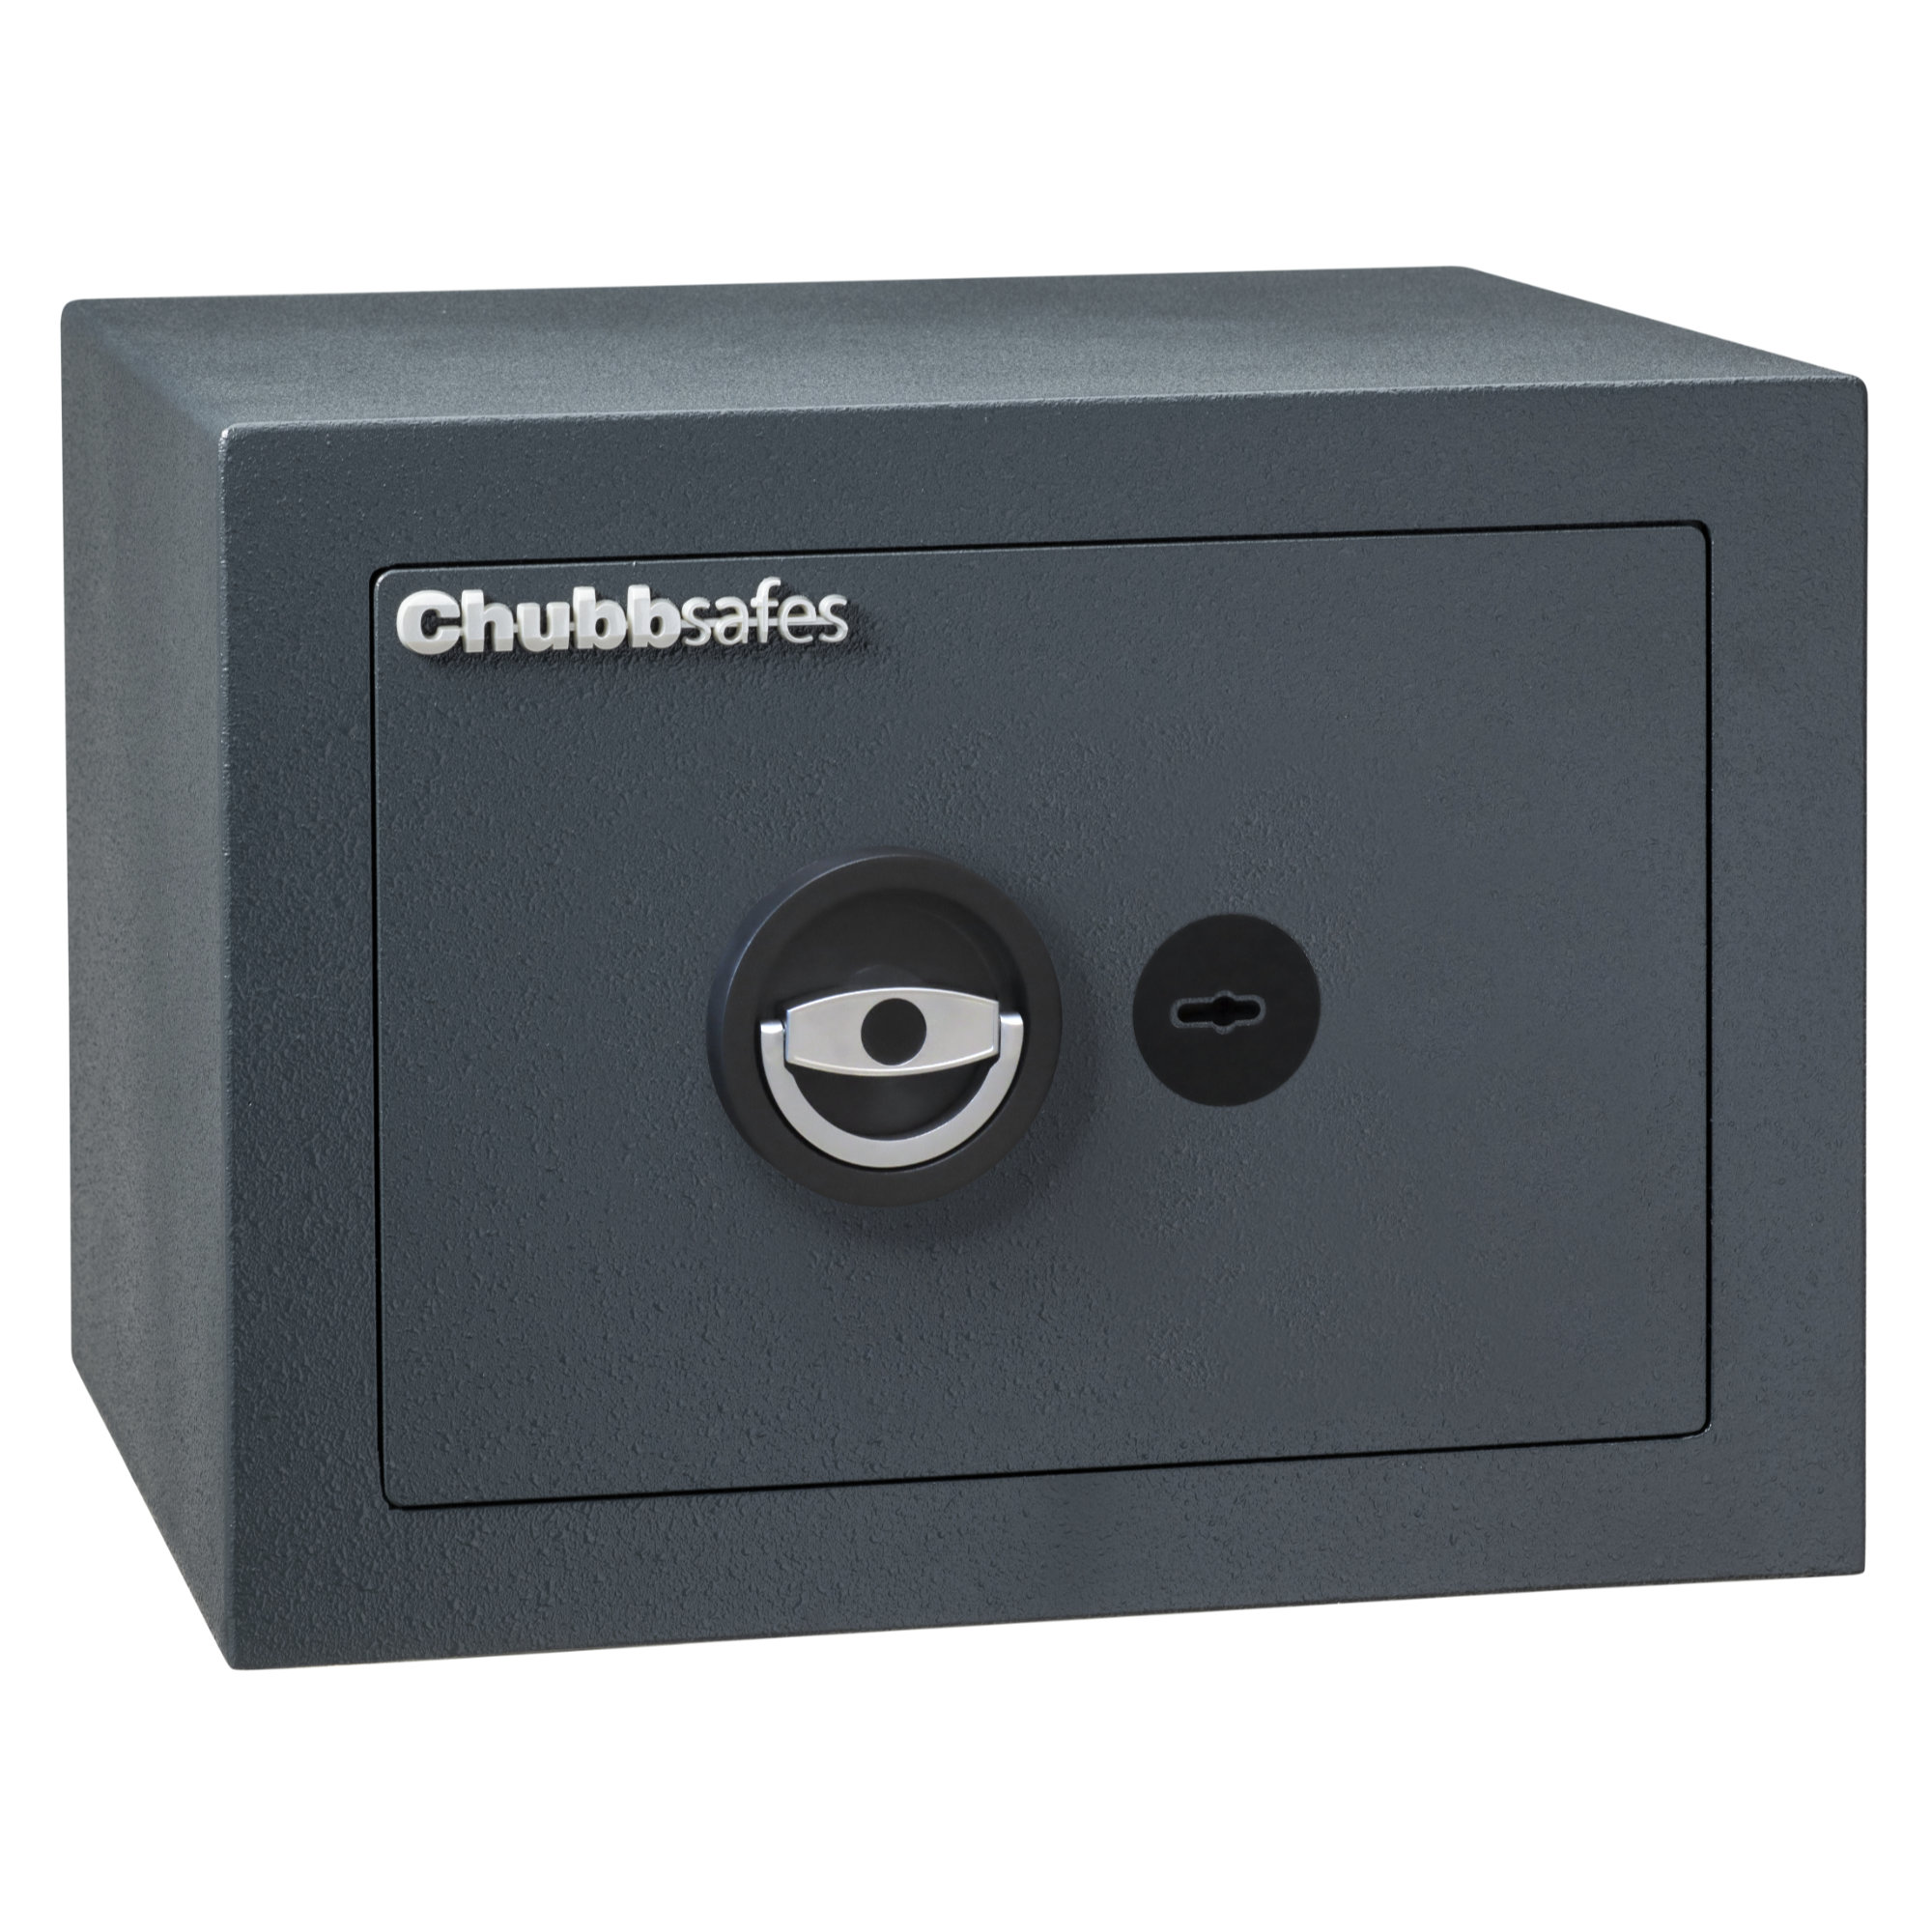 This Chubbsafes Zeta Grade 1 size 25k is a security safe for the home, office safe or small commercial safe that is secured by a high security key lock.